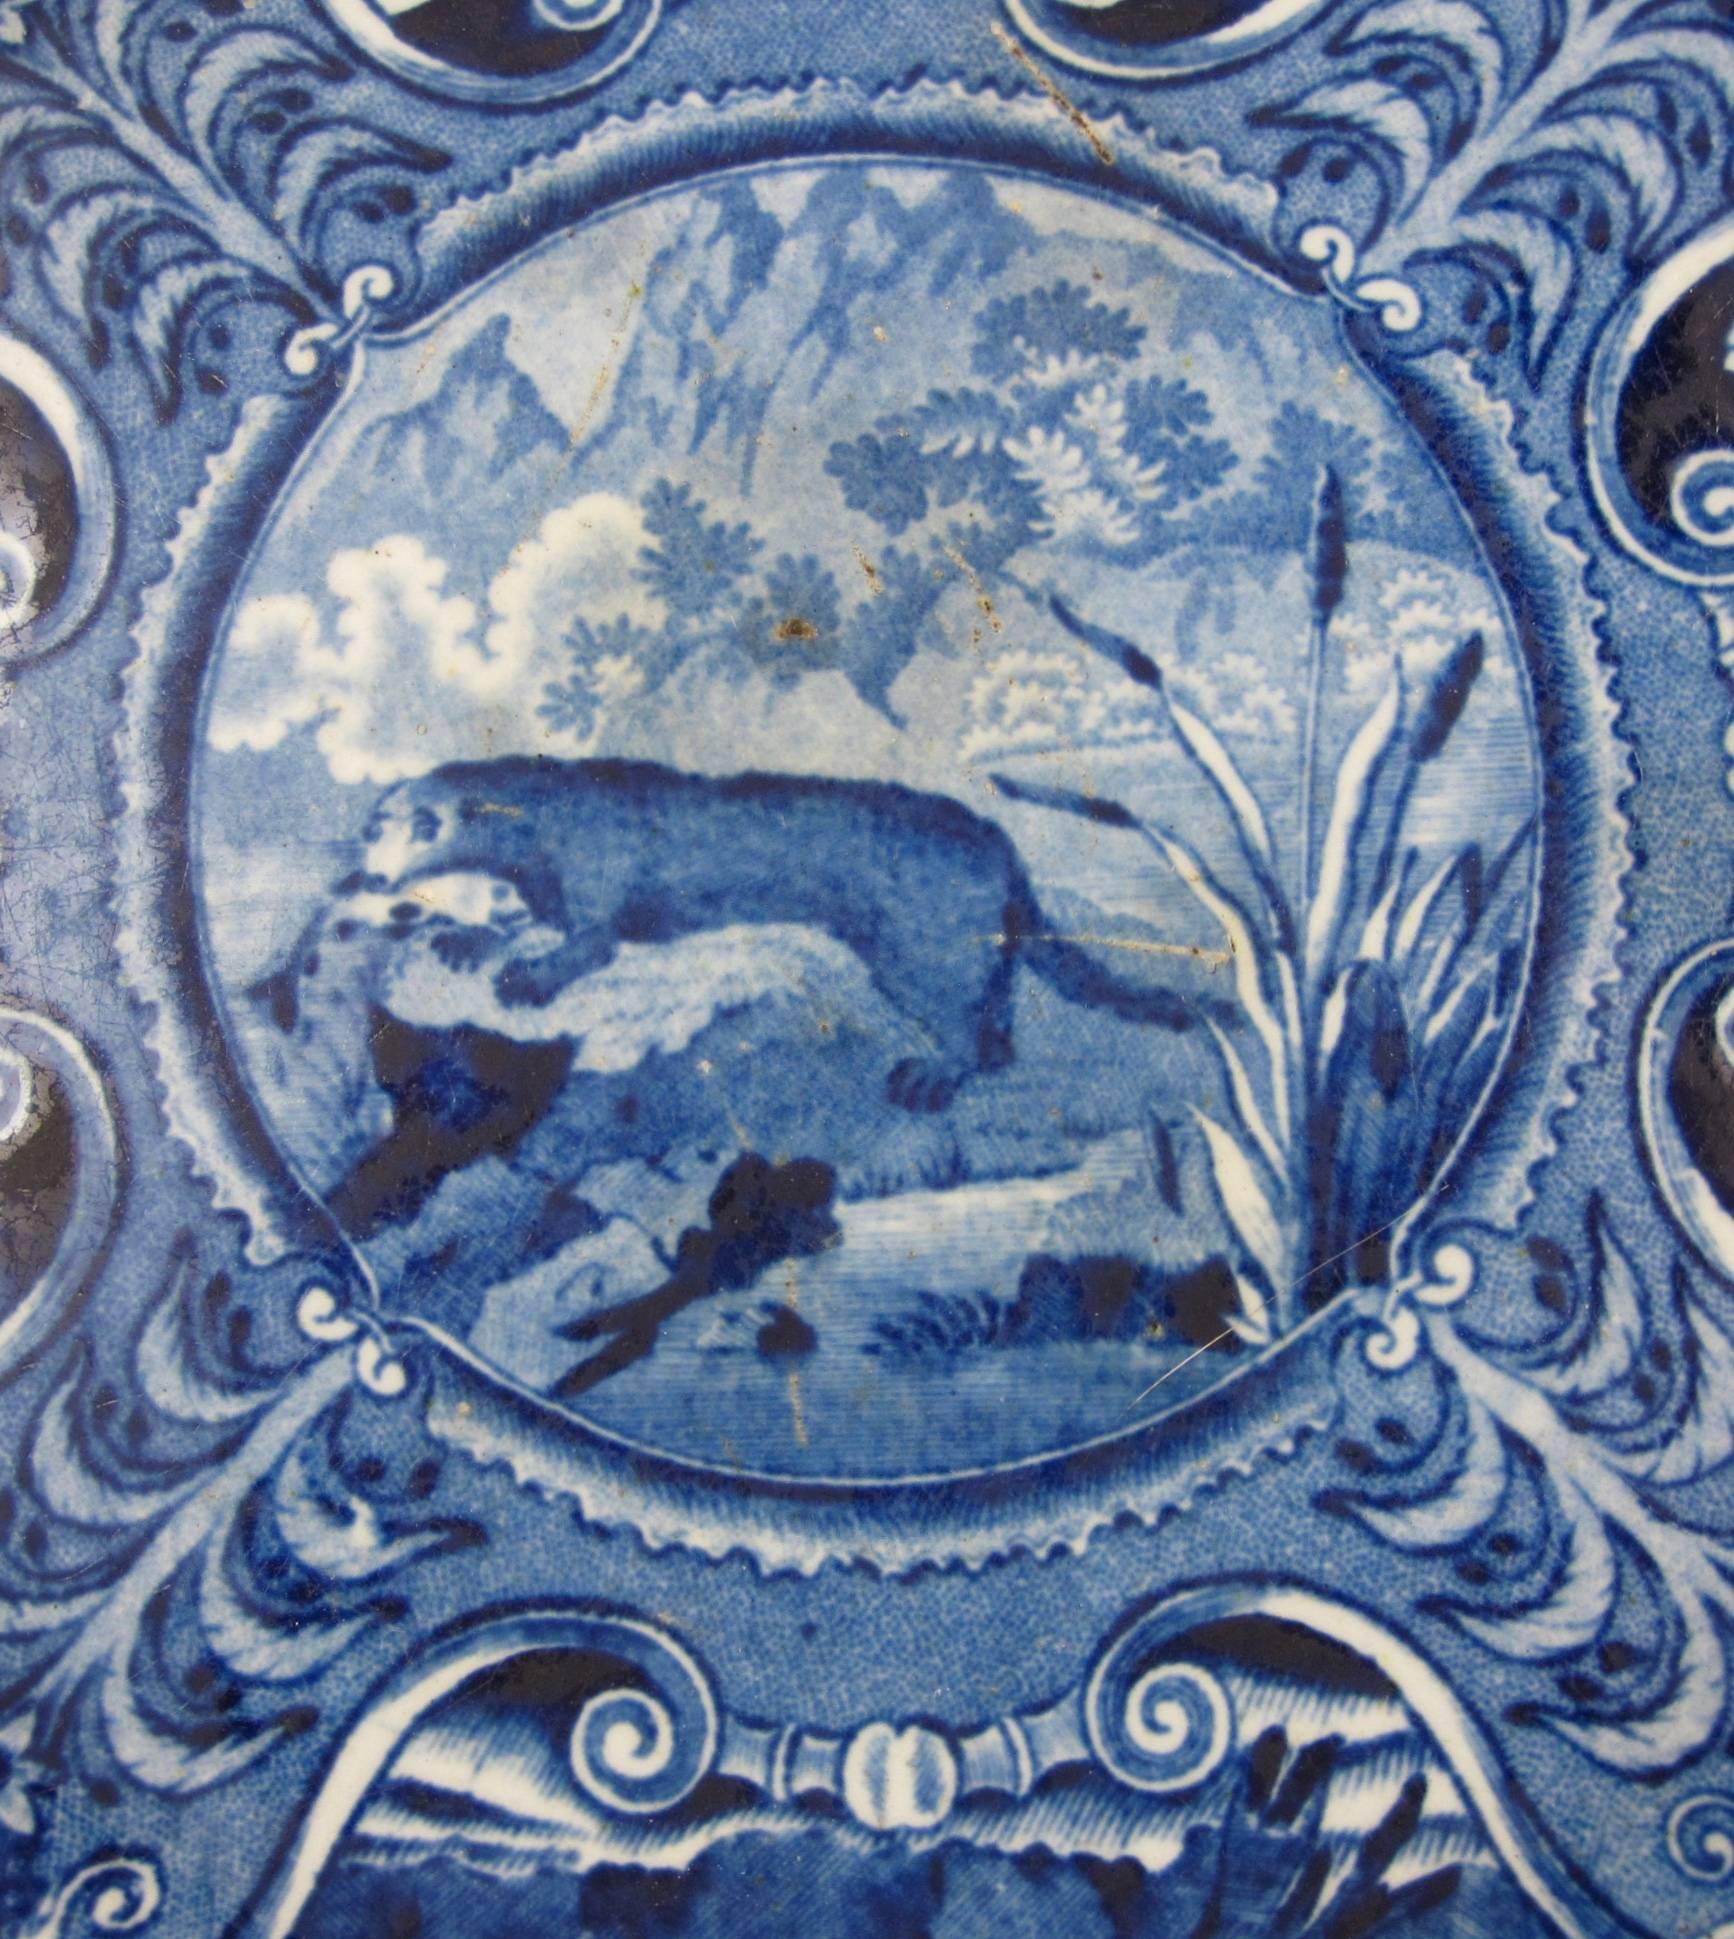 An earthenware plate transfer printed in blue, the River Otter, part of the desirable  Quadruped series, John Hall & Sons, Burslem Staffordshire, circa 1825-1830.

 The animals in the border cartouches are clockwise from the top: Hedge Hog and